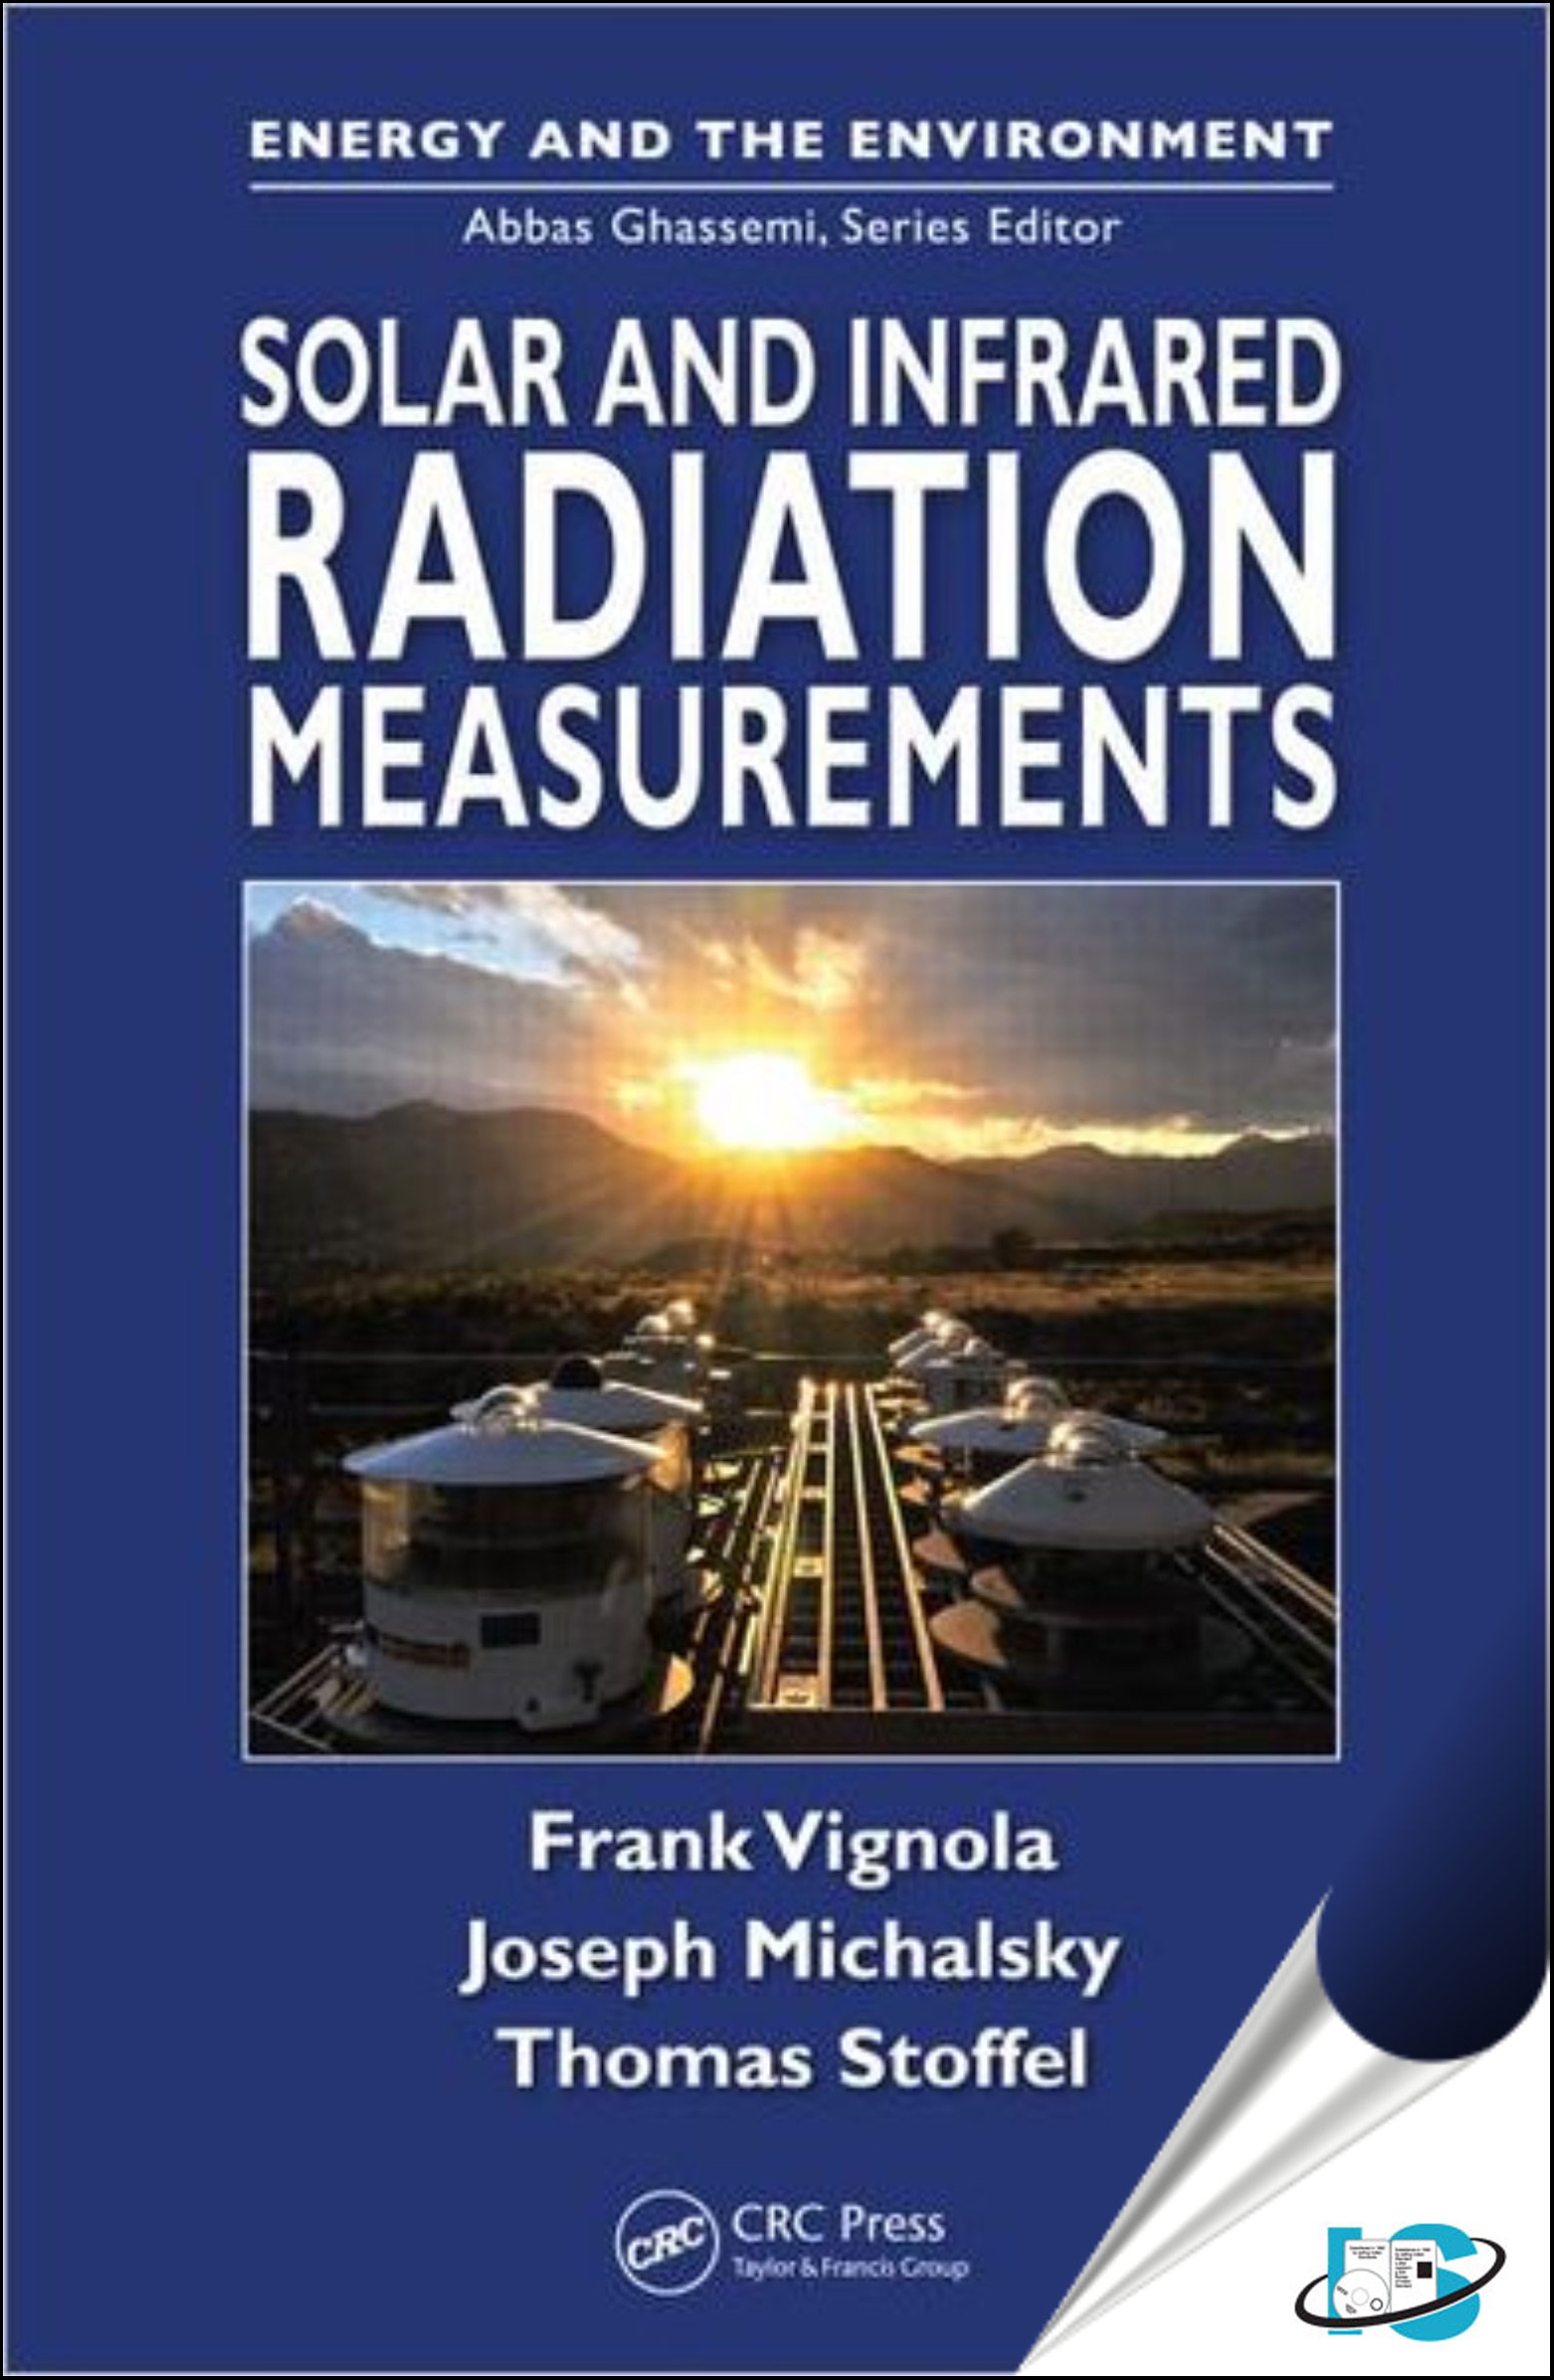 Solar and Infrared Radiation Measurements (Energy and the Environment) Frank Vignola, Joseph Michalsky and Thomas Stoffel